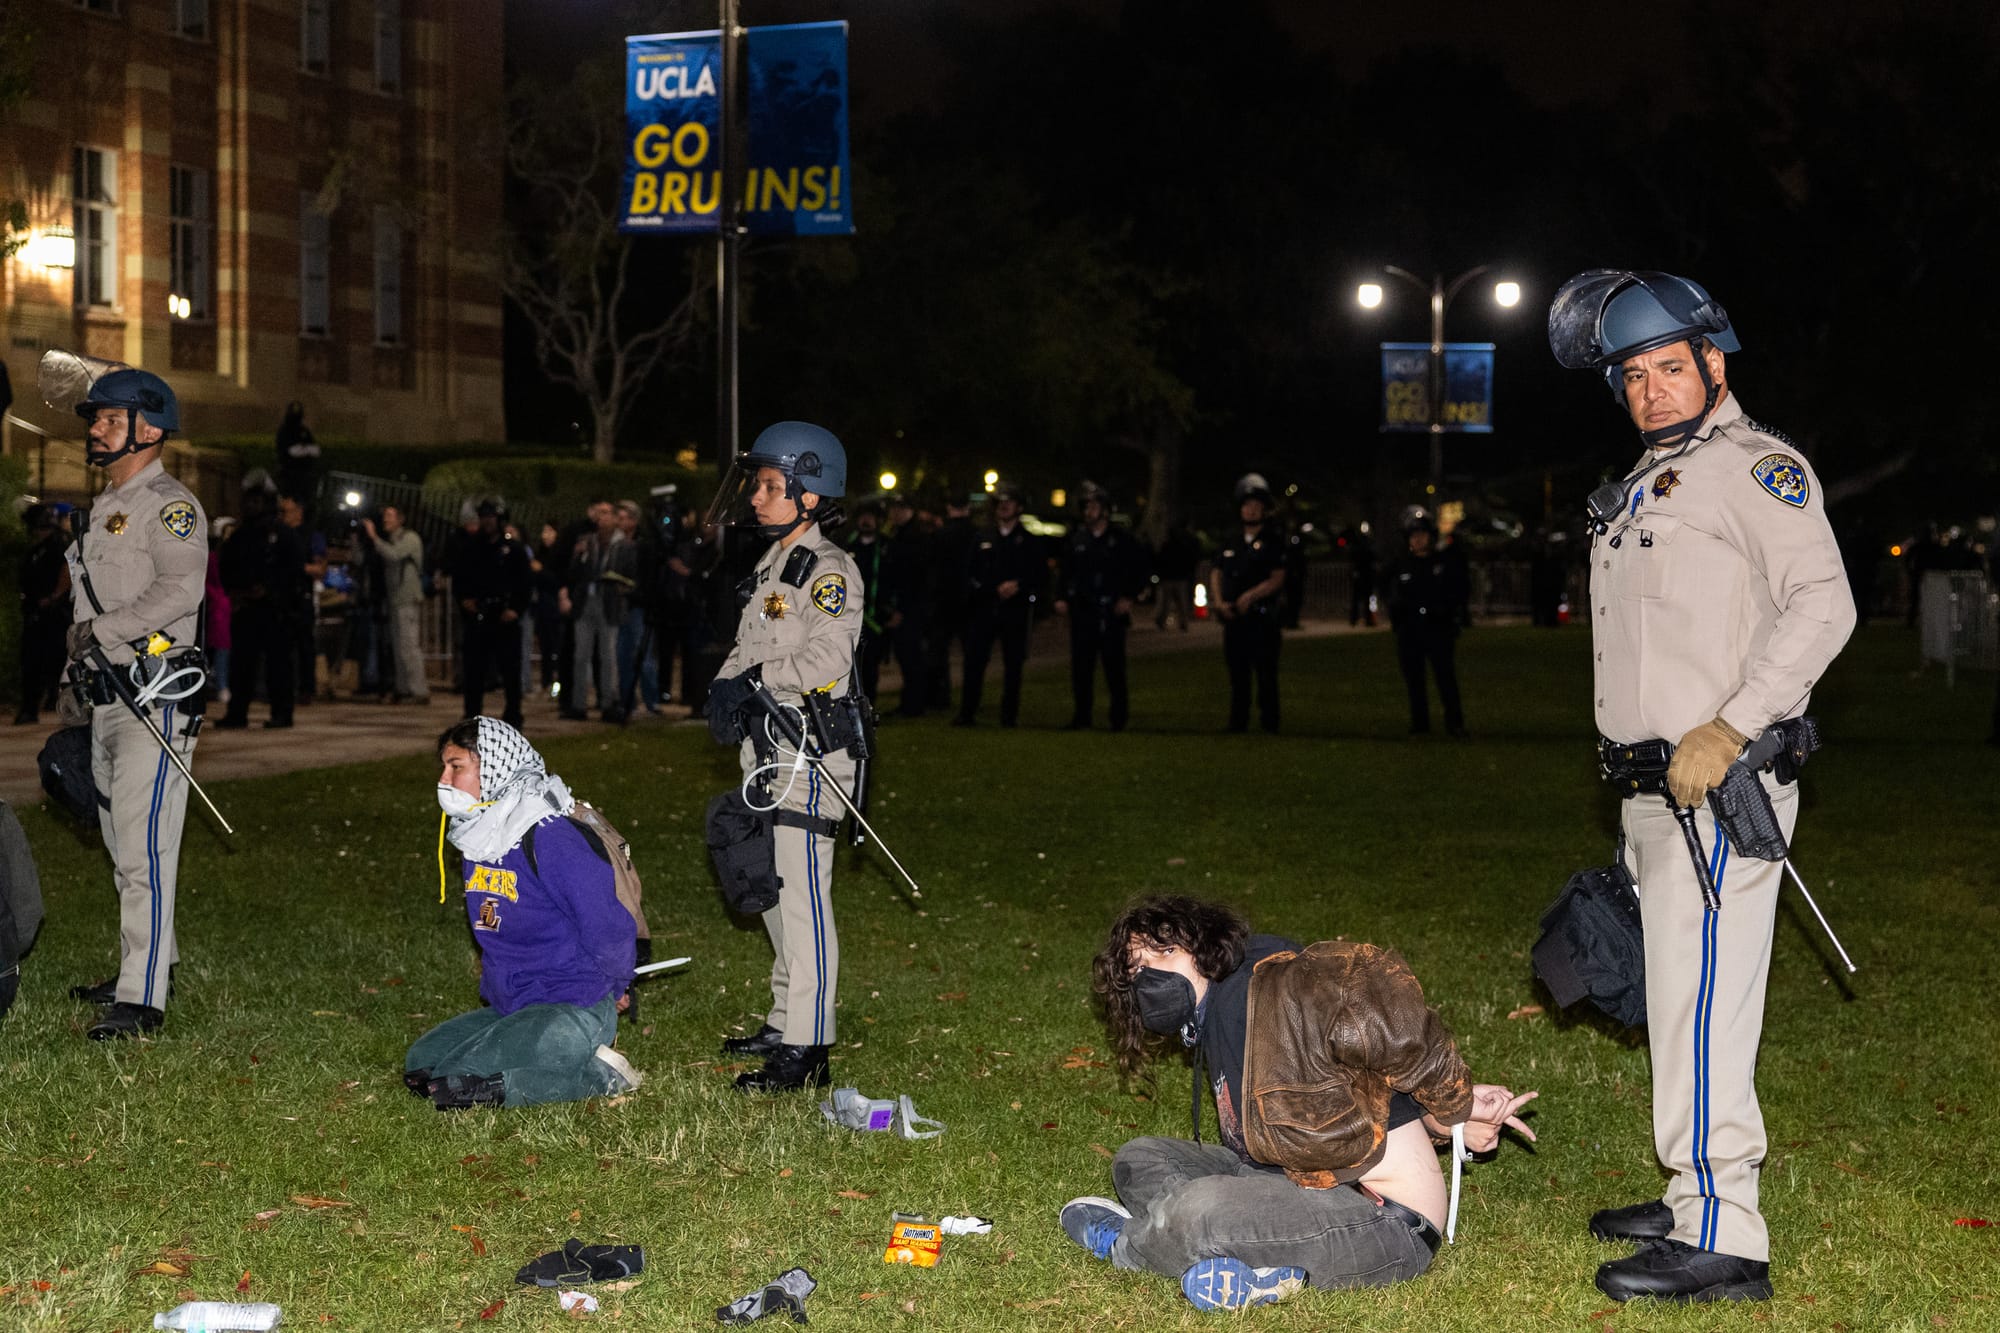 UCLA’s Students Face Zionist Attackers and Police Violence